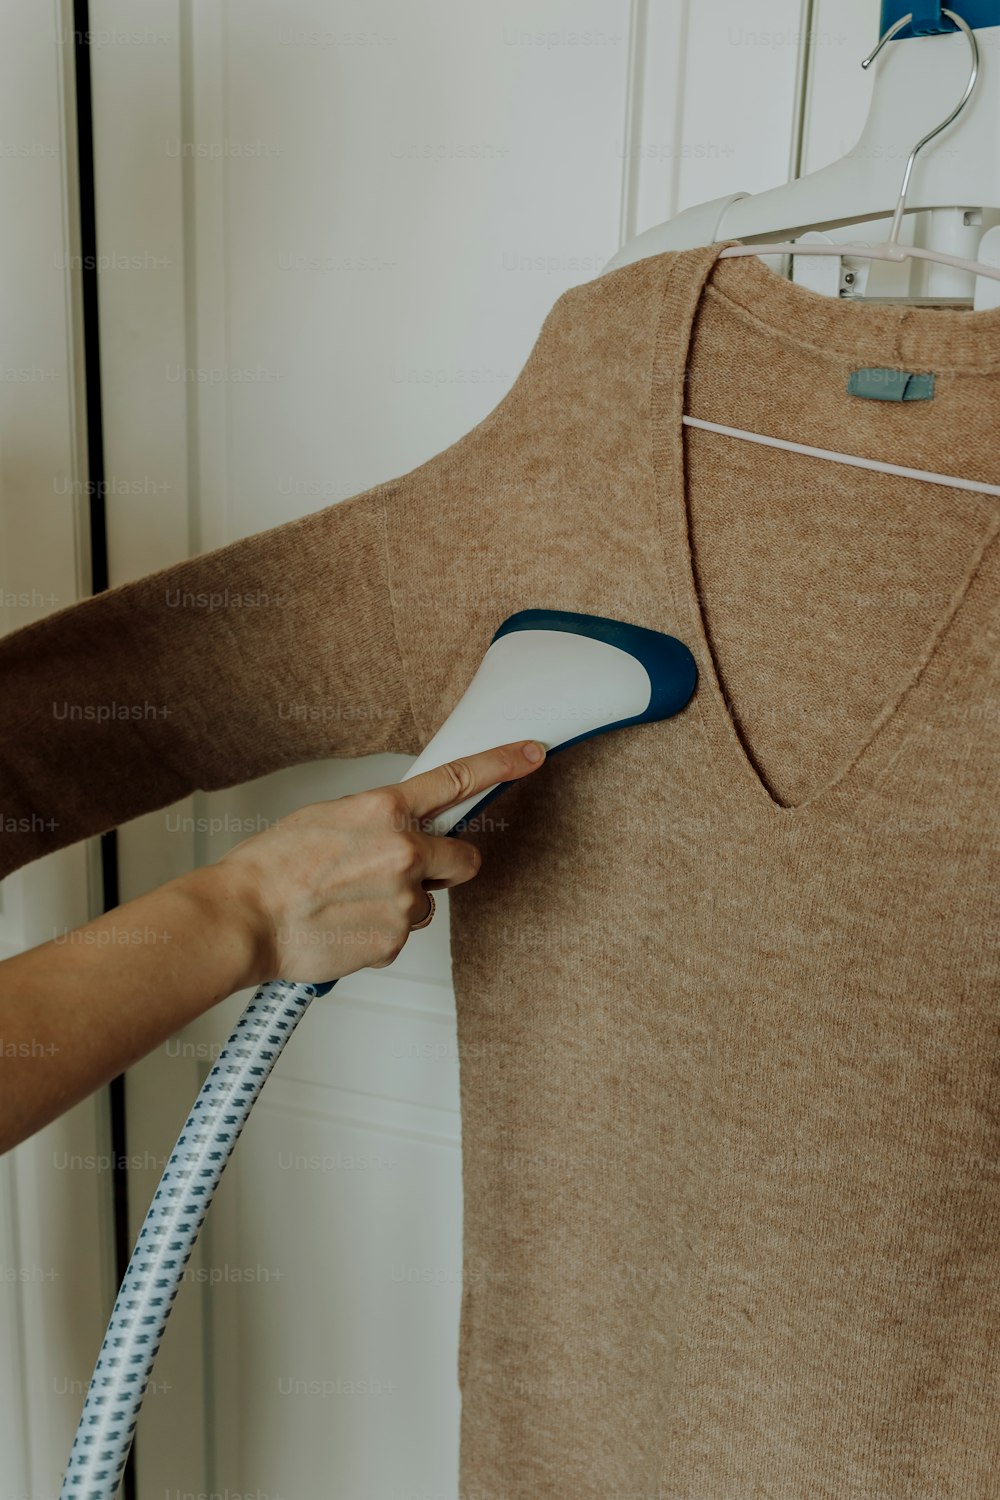 a person using a hair dryer to dry a t - shirt